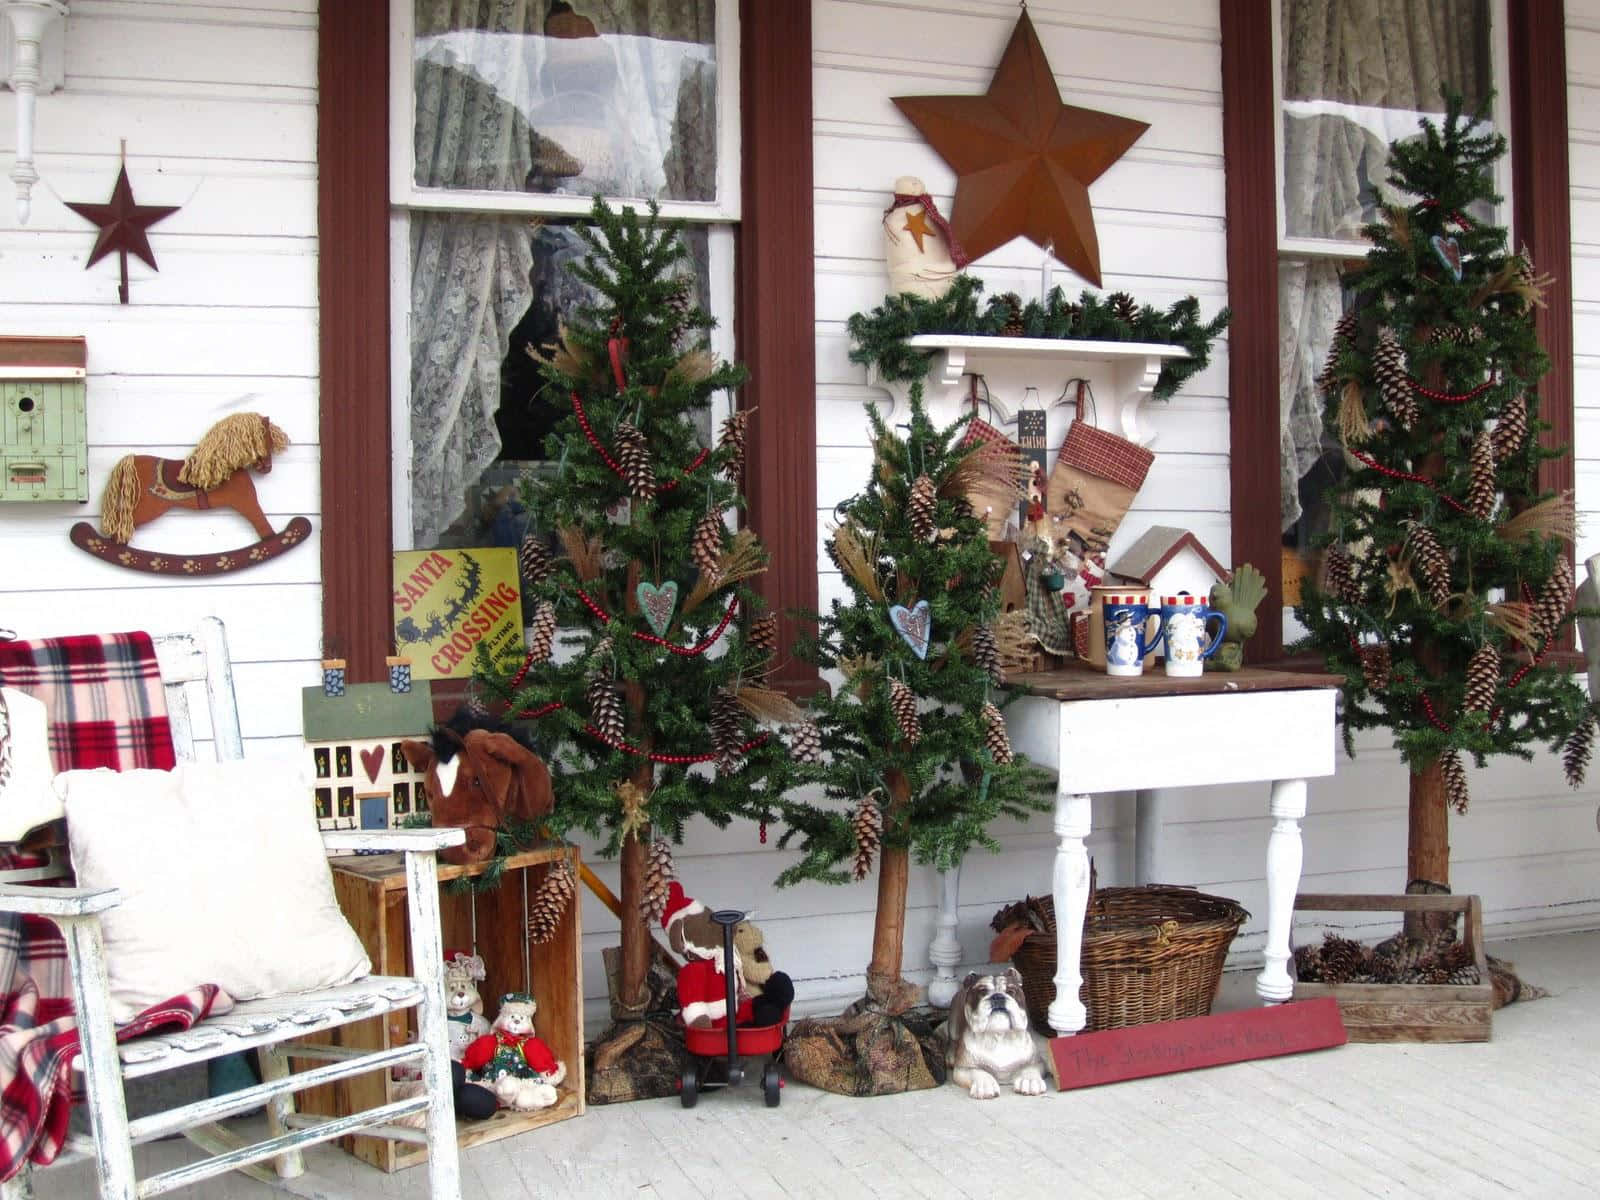 A Porch With Christmas Decorations And A Rocking Chair